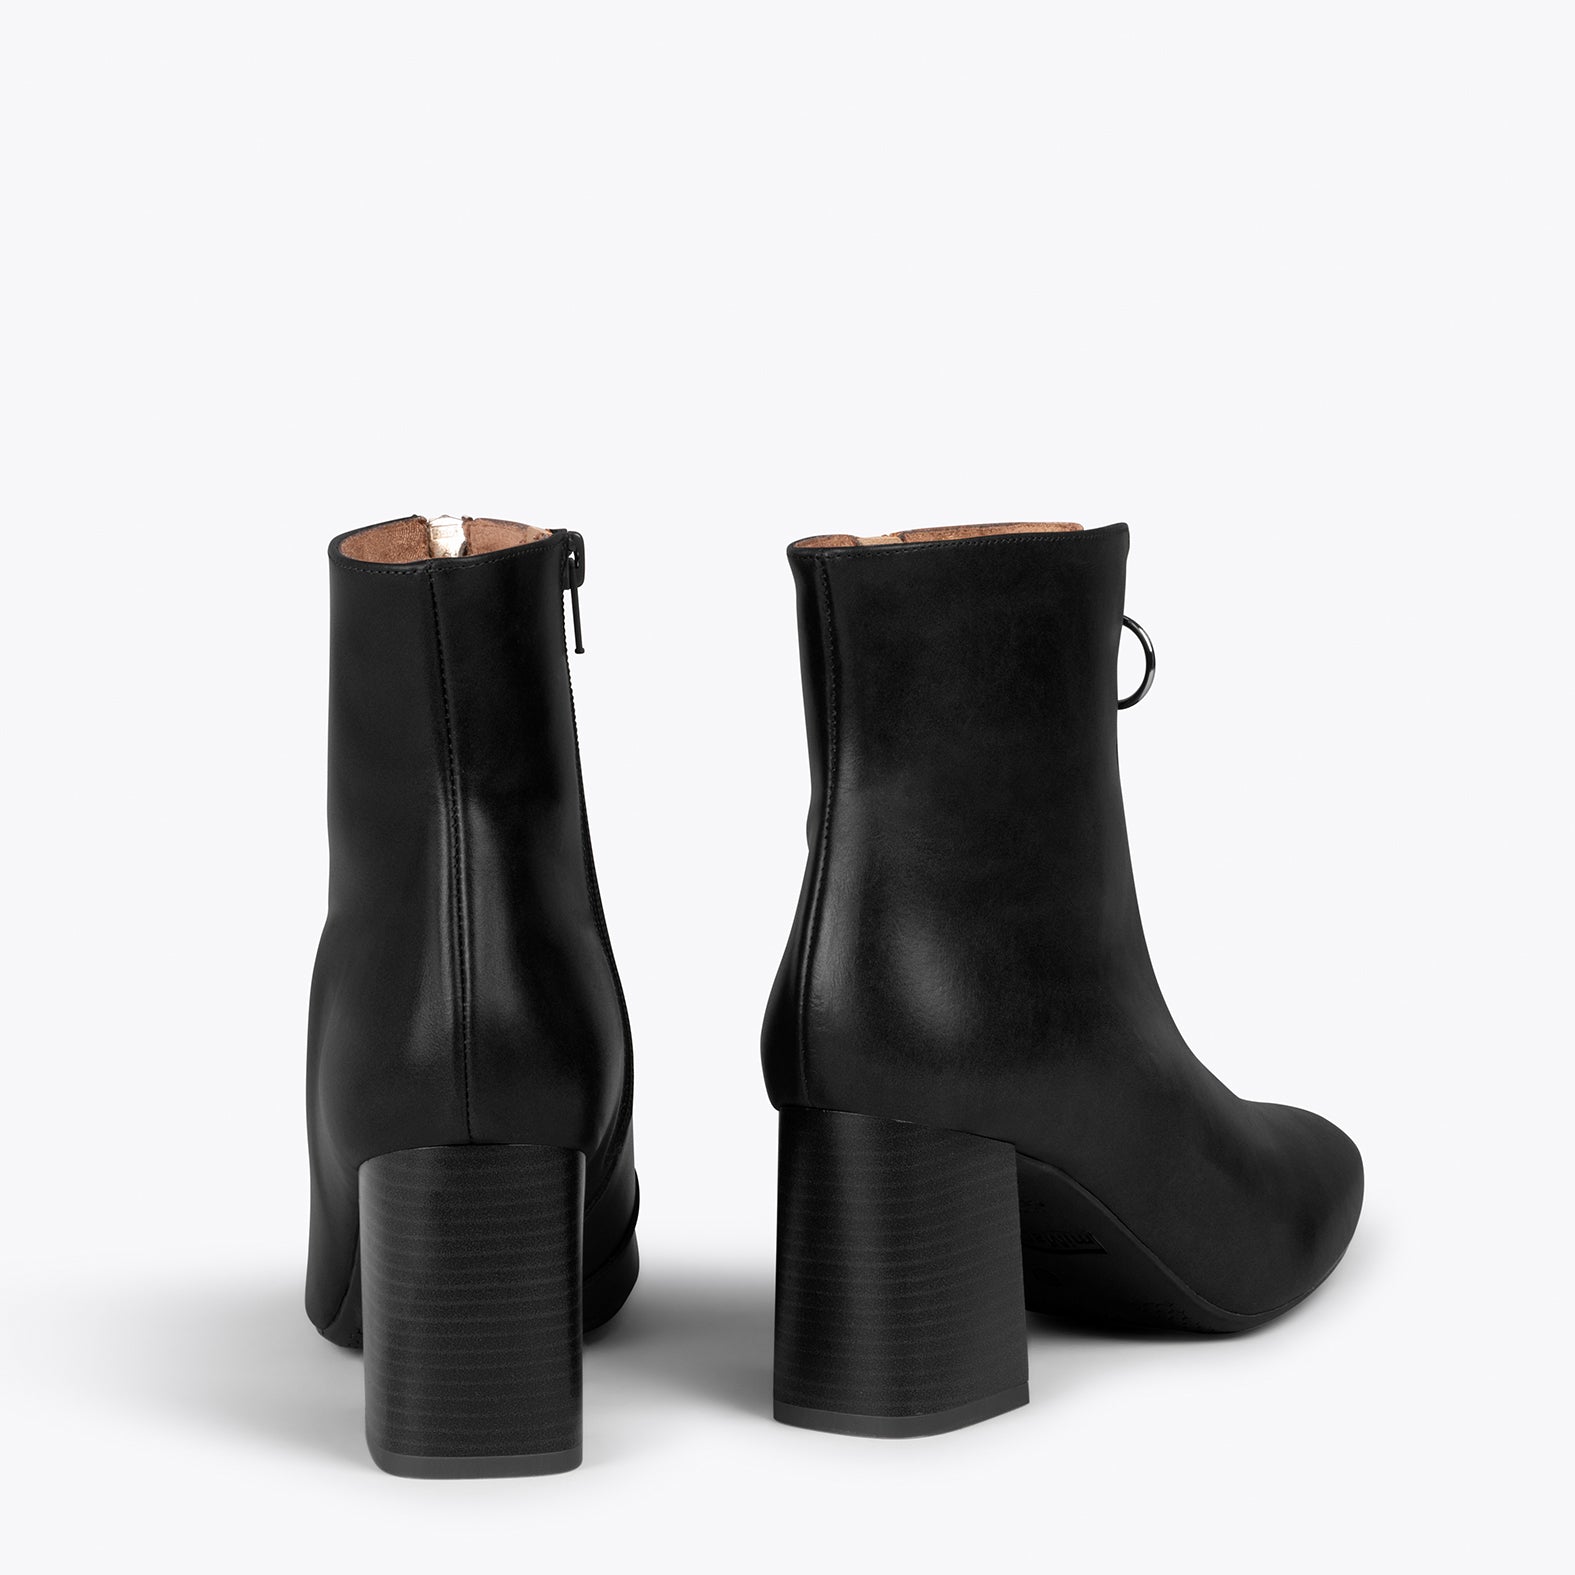 GIRL – BLACK bootie with decorative front zipper